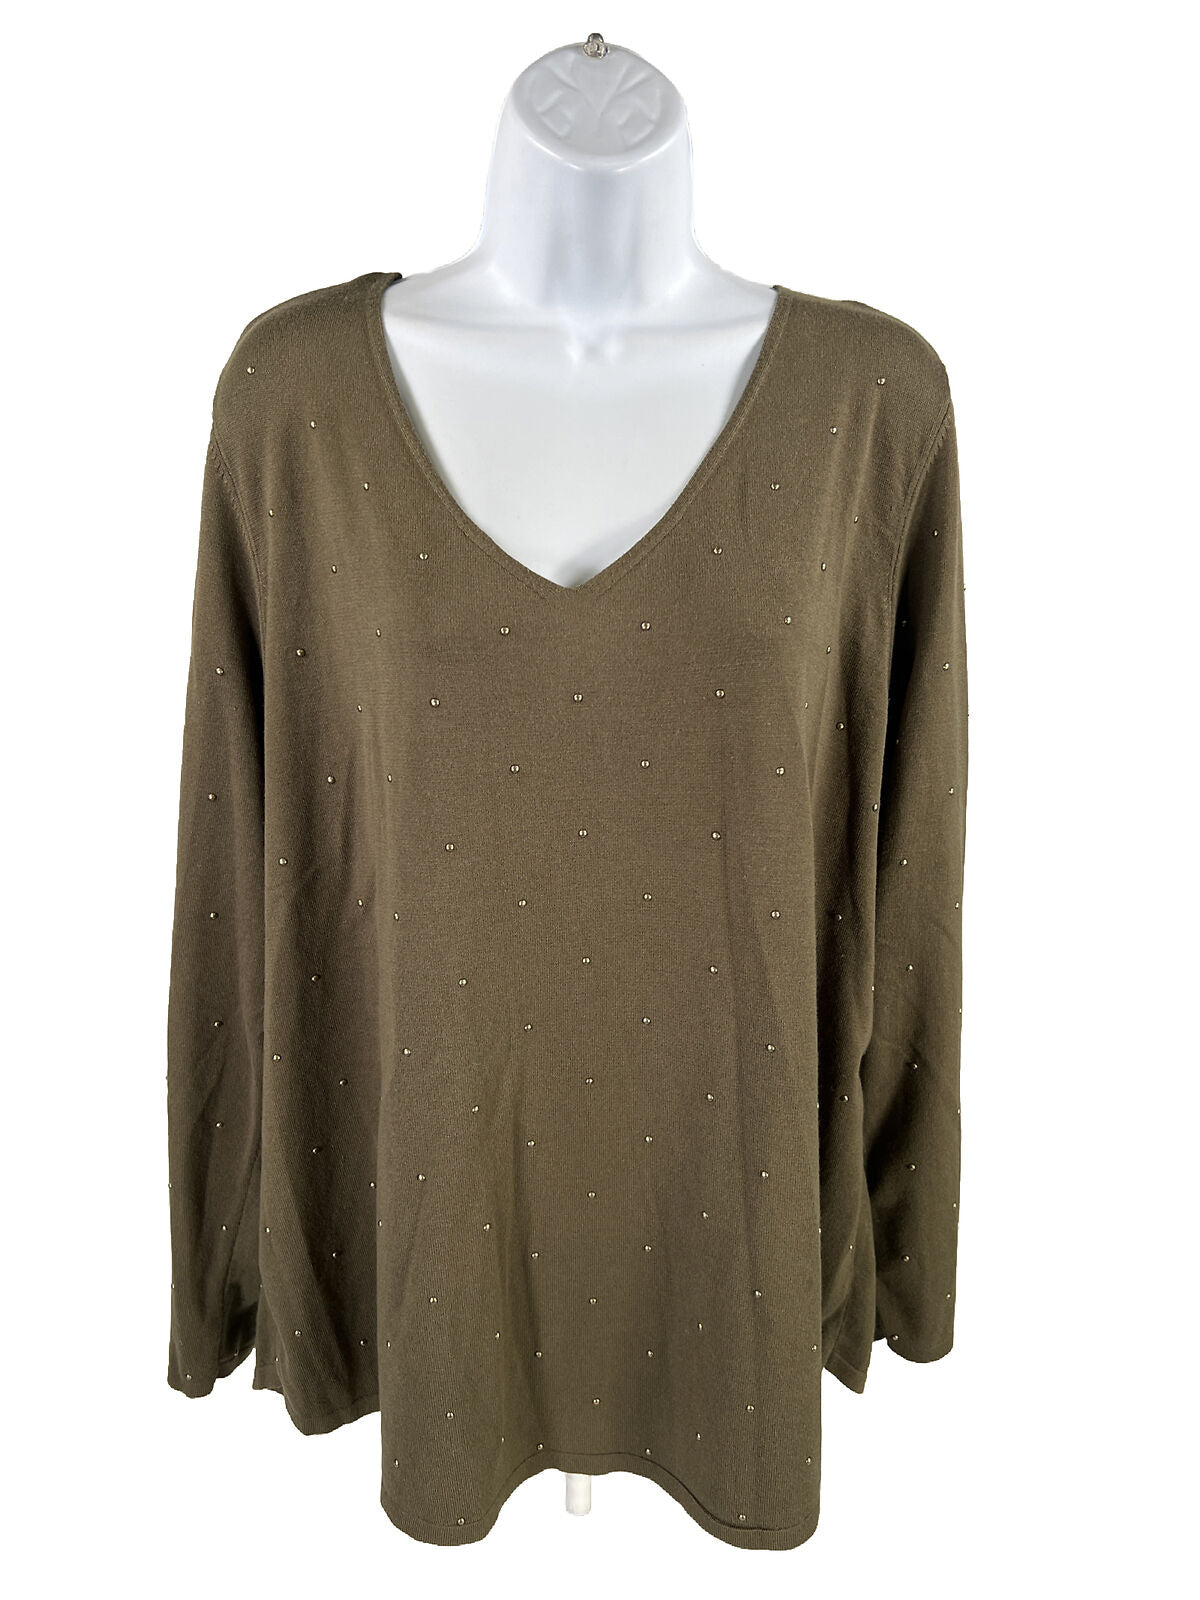 Chico's Women's Green V-Neck Studded Accent Sweater - 3/US XL